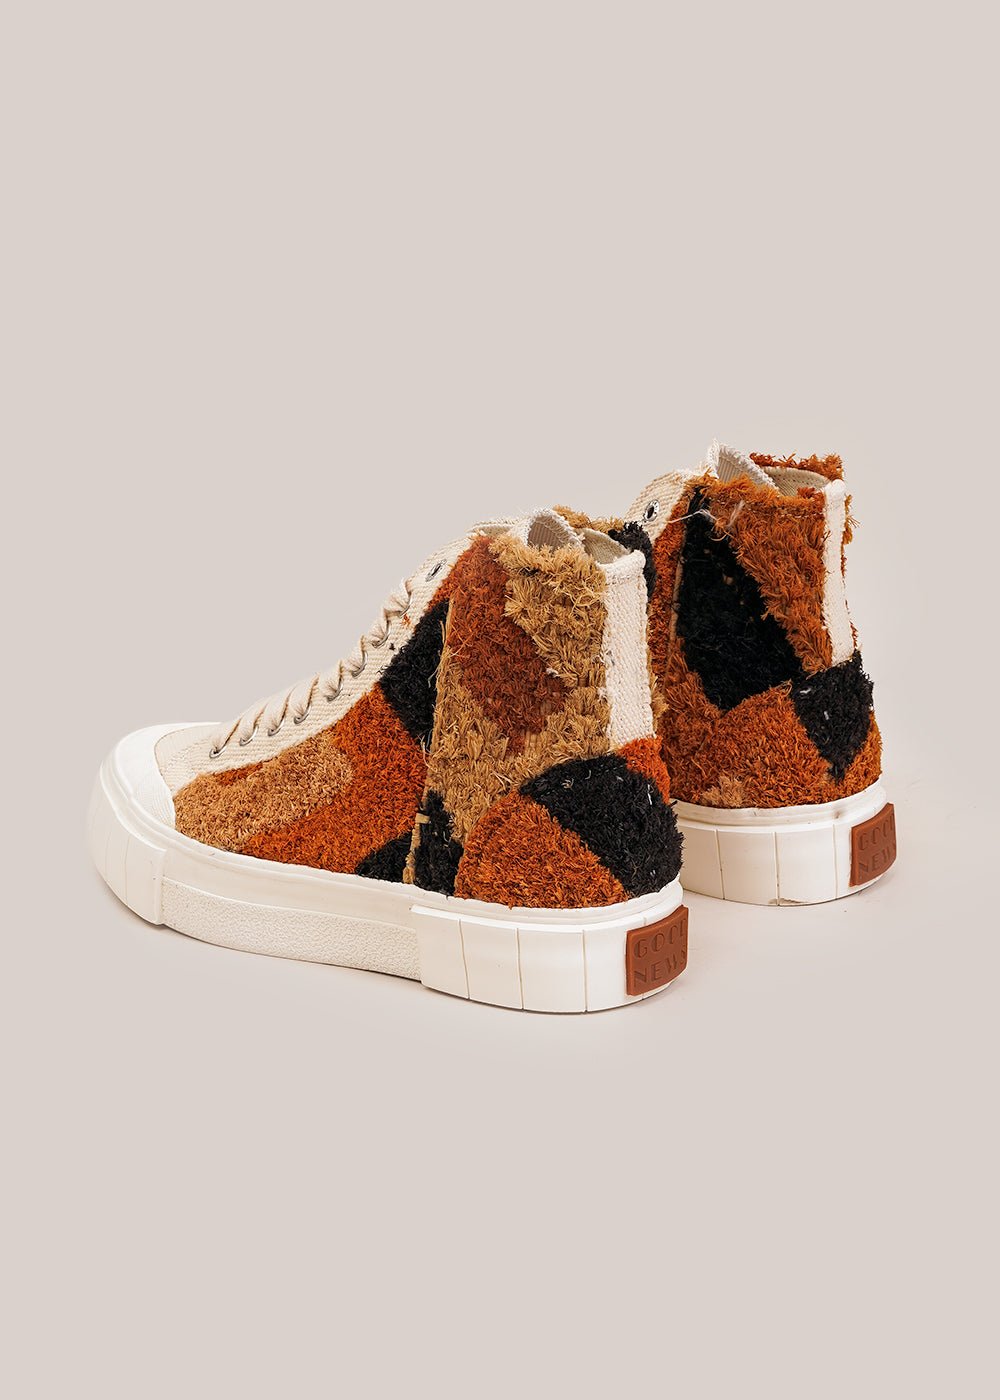 Oatmeal Palm Moroccan Sneakers By GOOD NEWS SHOES – New Classics Studios